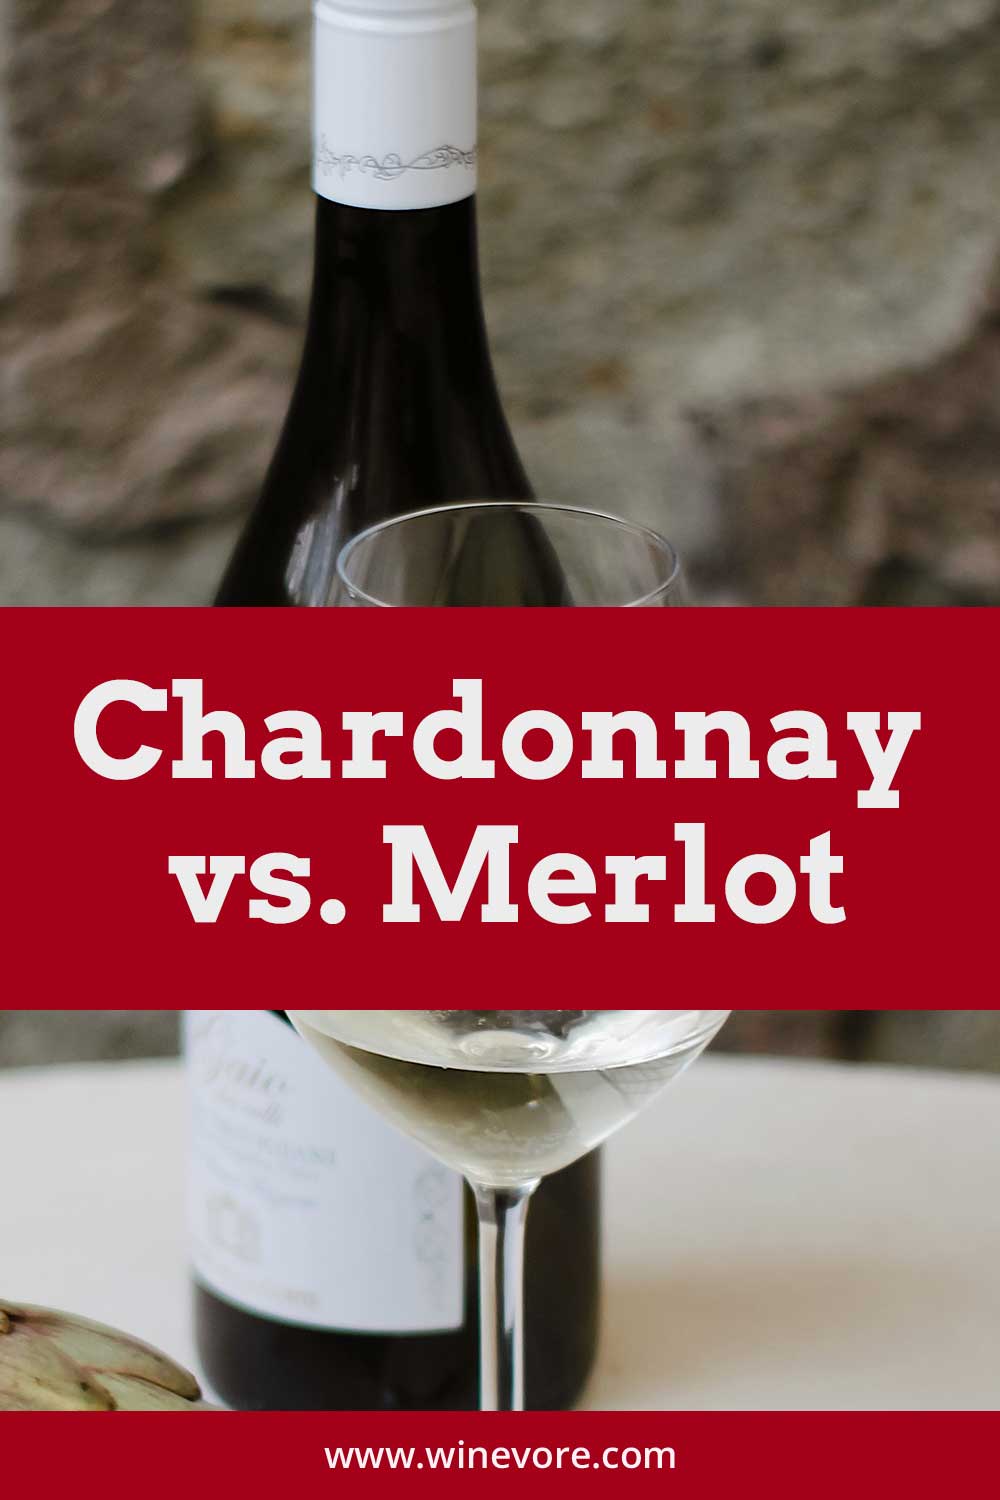 Glass of white wine with a wine bottle on a table - Chardonnay vs. Merlot.